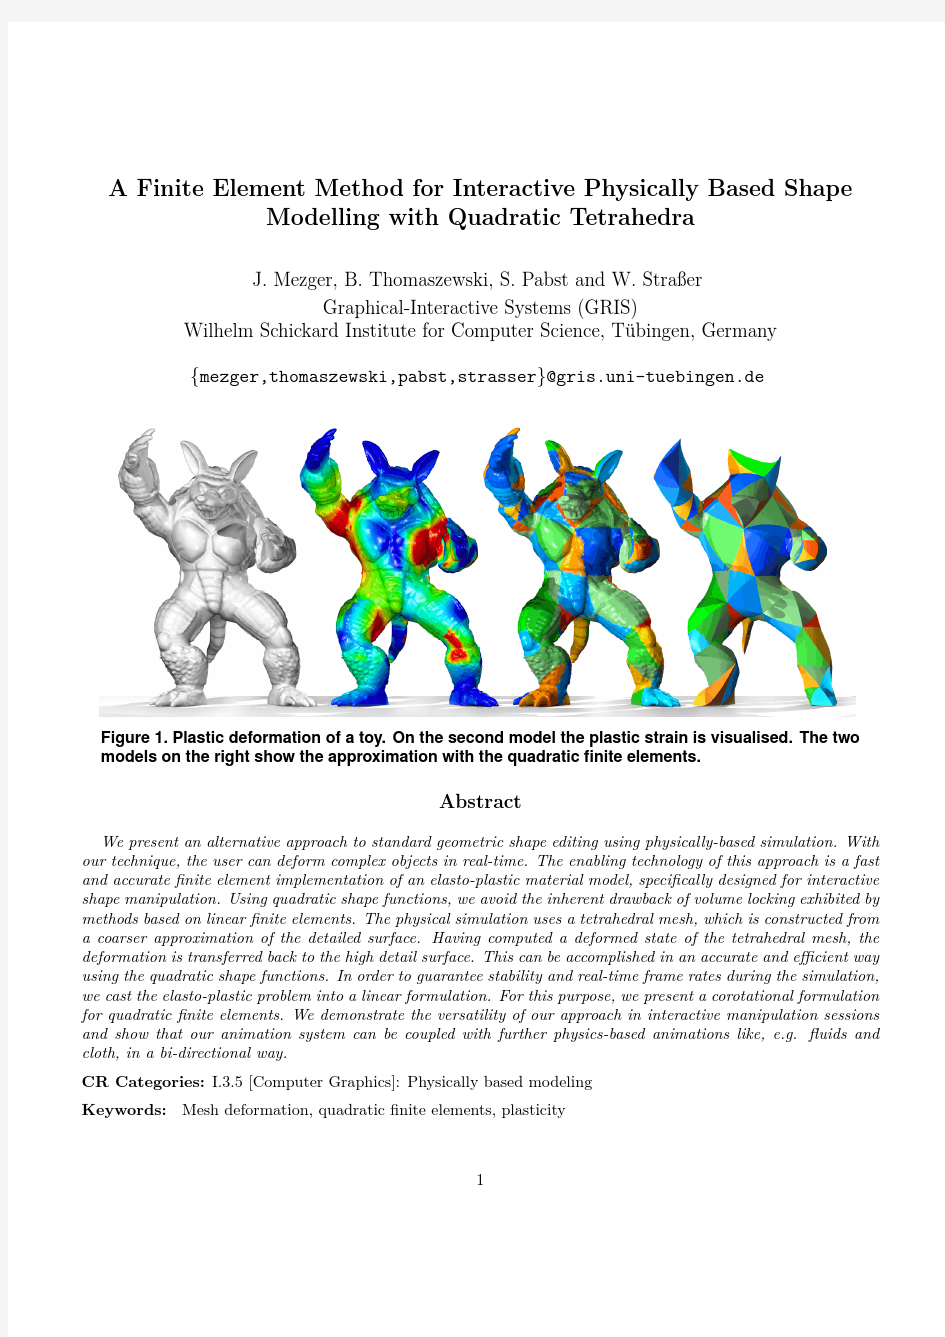 A Finite Element Method for Interactive Physically Based Shape Modelling with Quadratic Tet